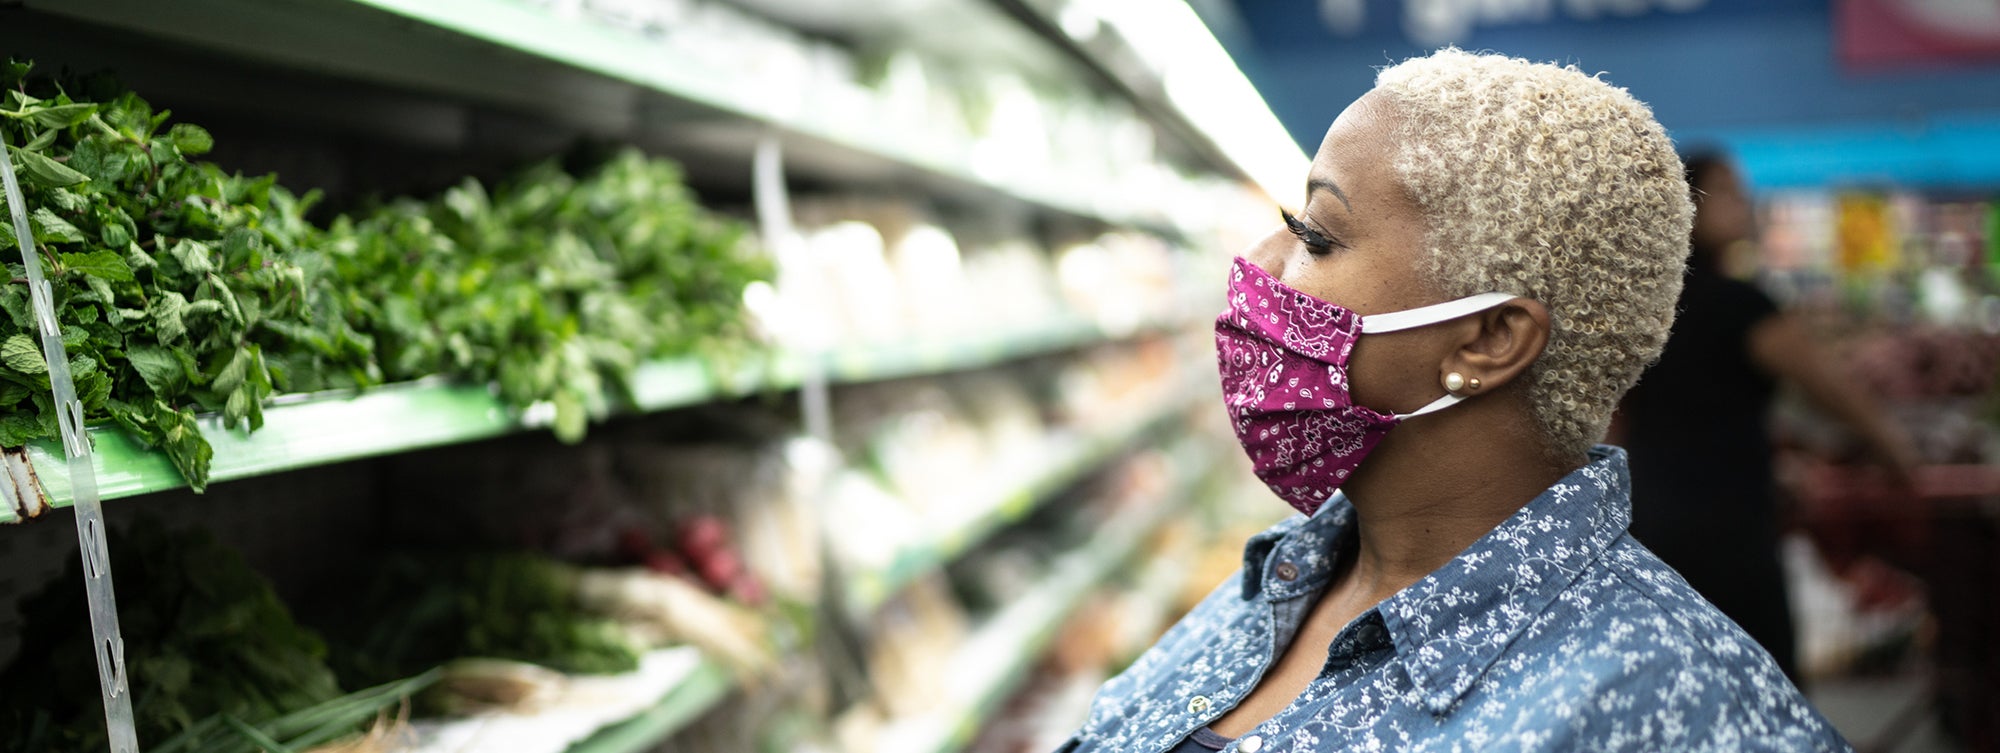 Woman with a cloth face mask shopping at a grocery store